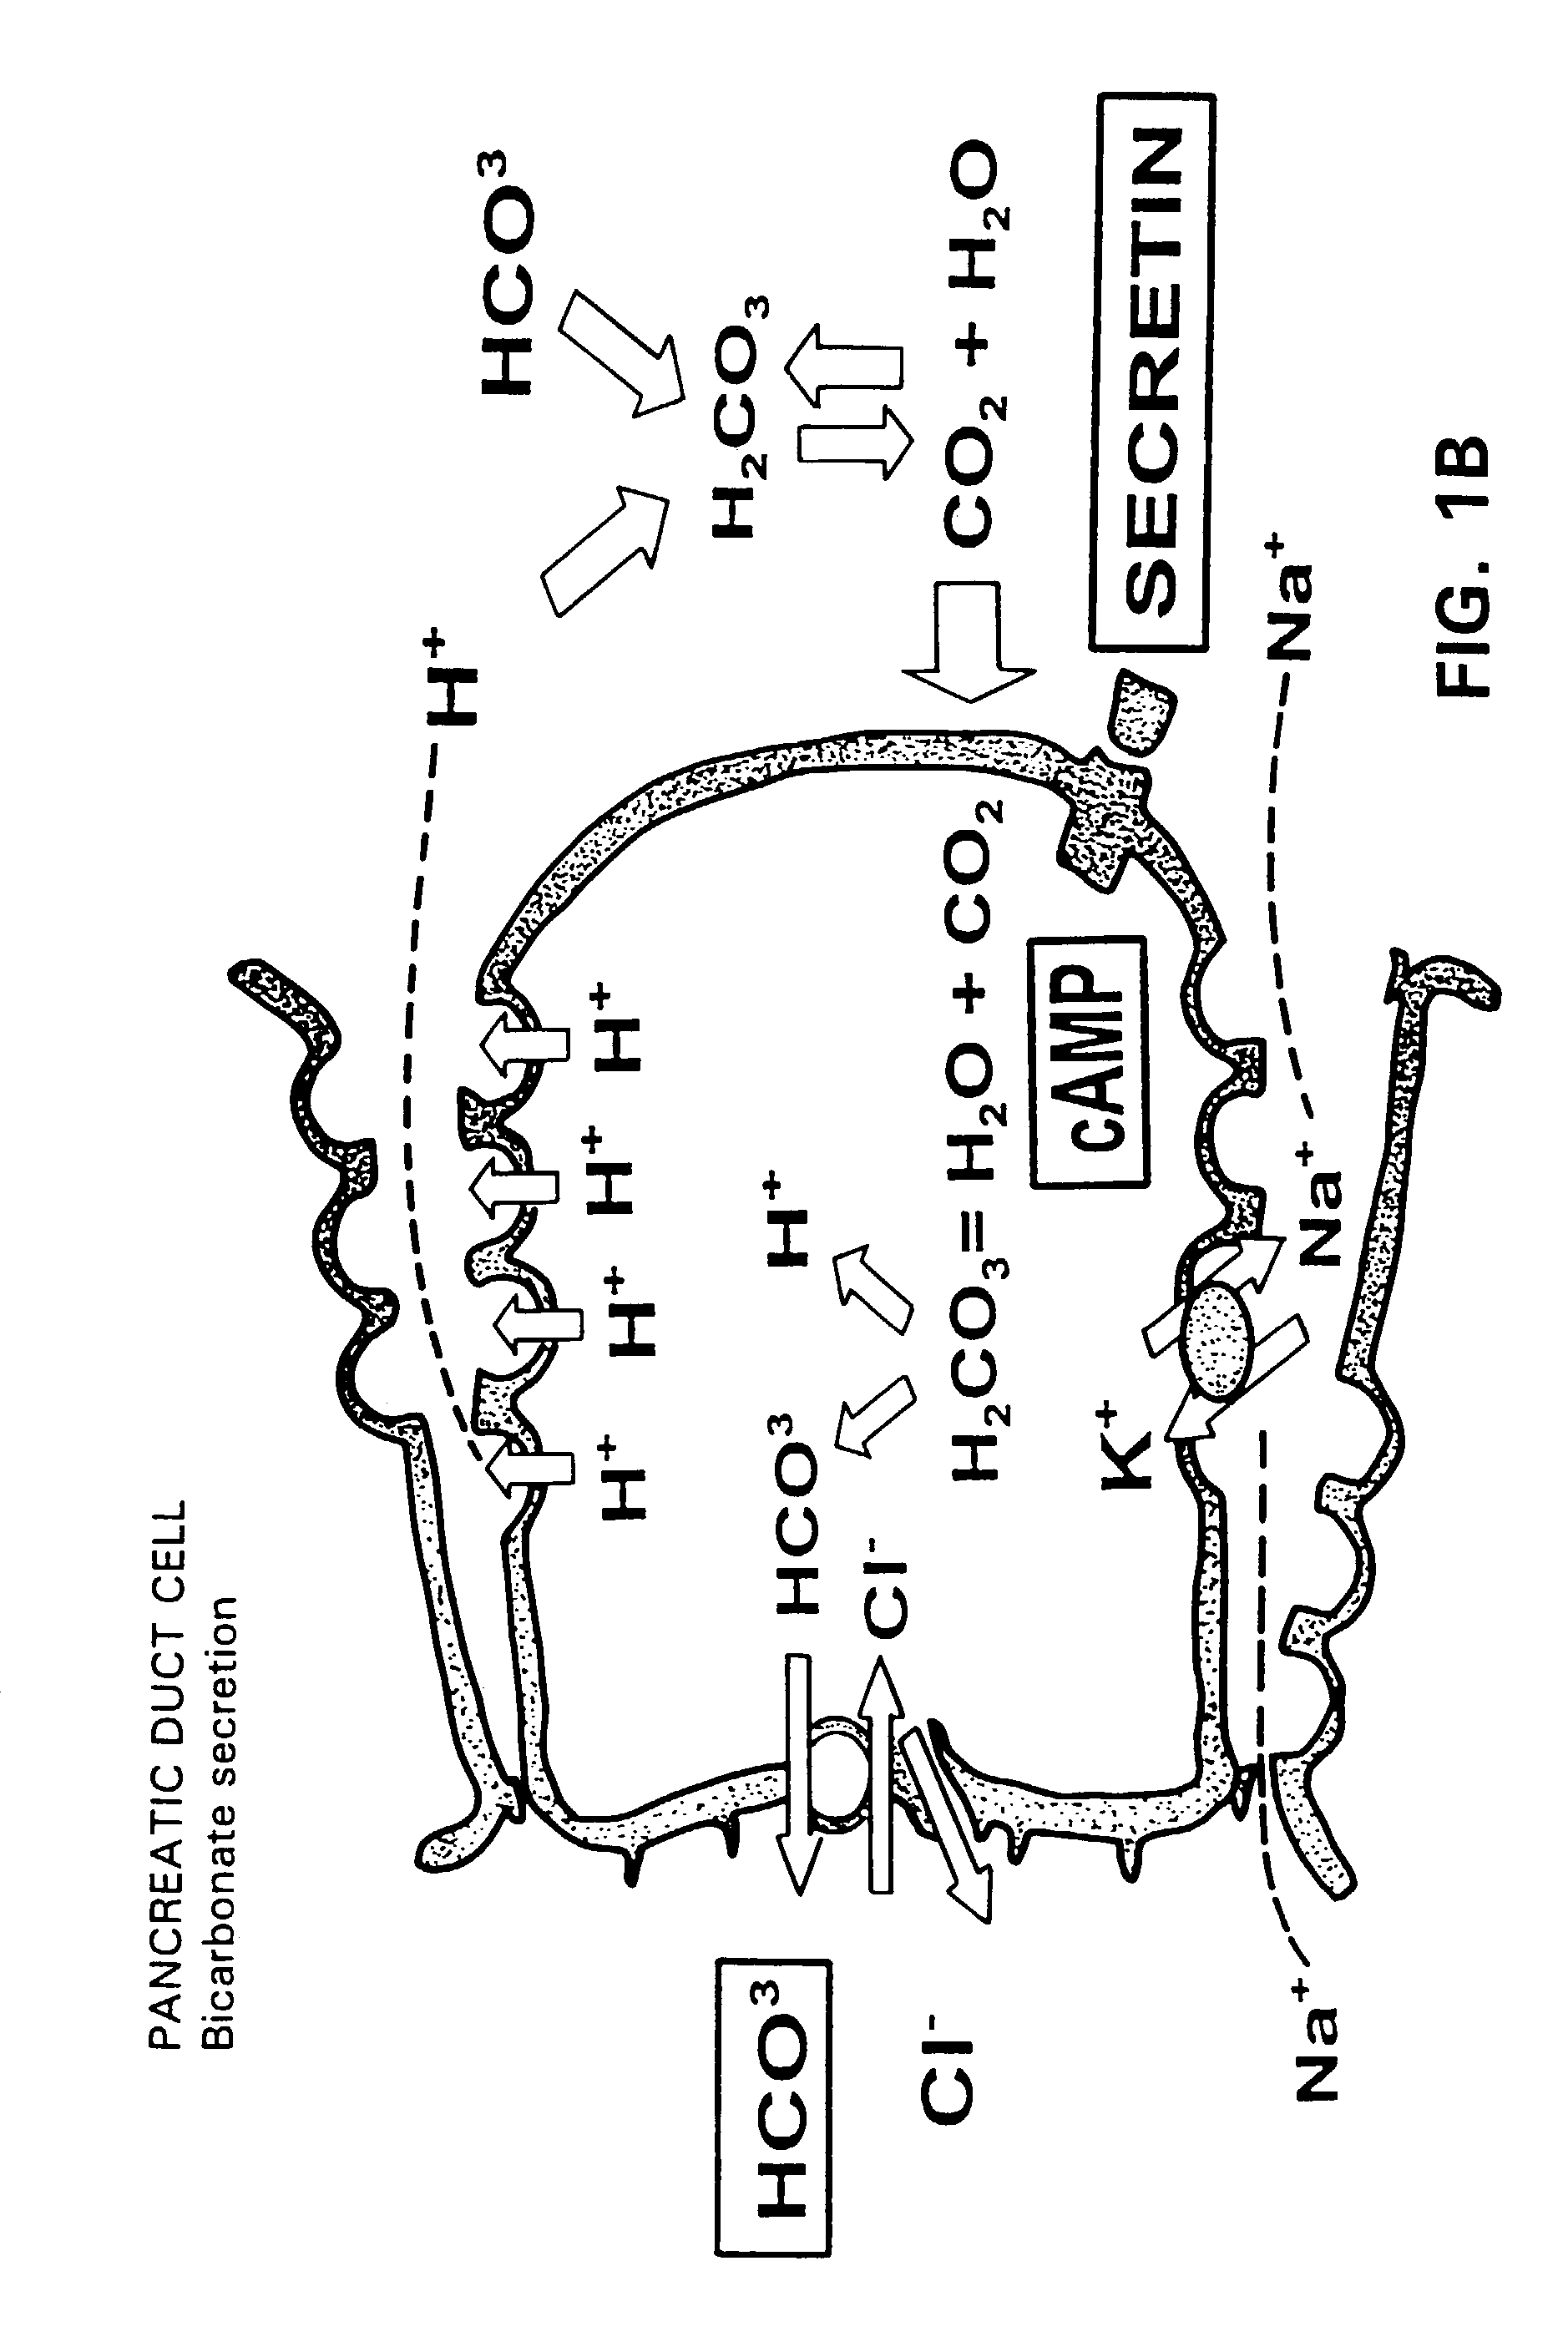 Method for assisting in differential diagnosis and treatment of autistic syndromes